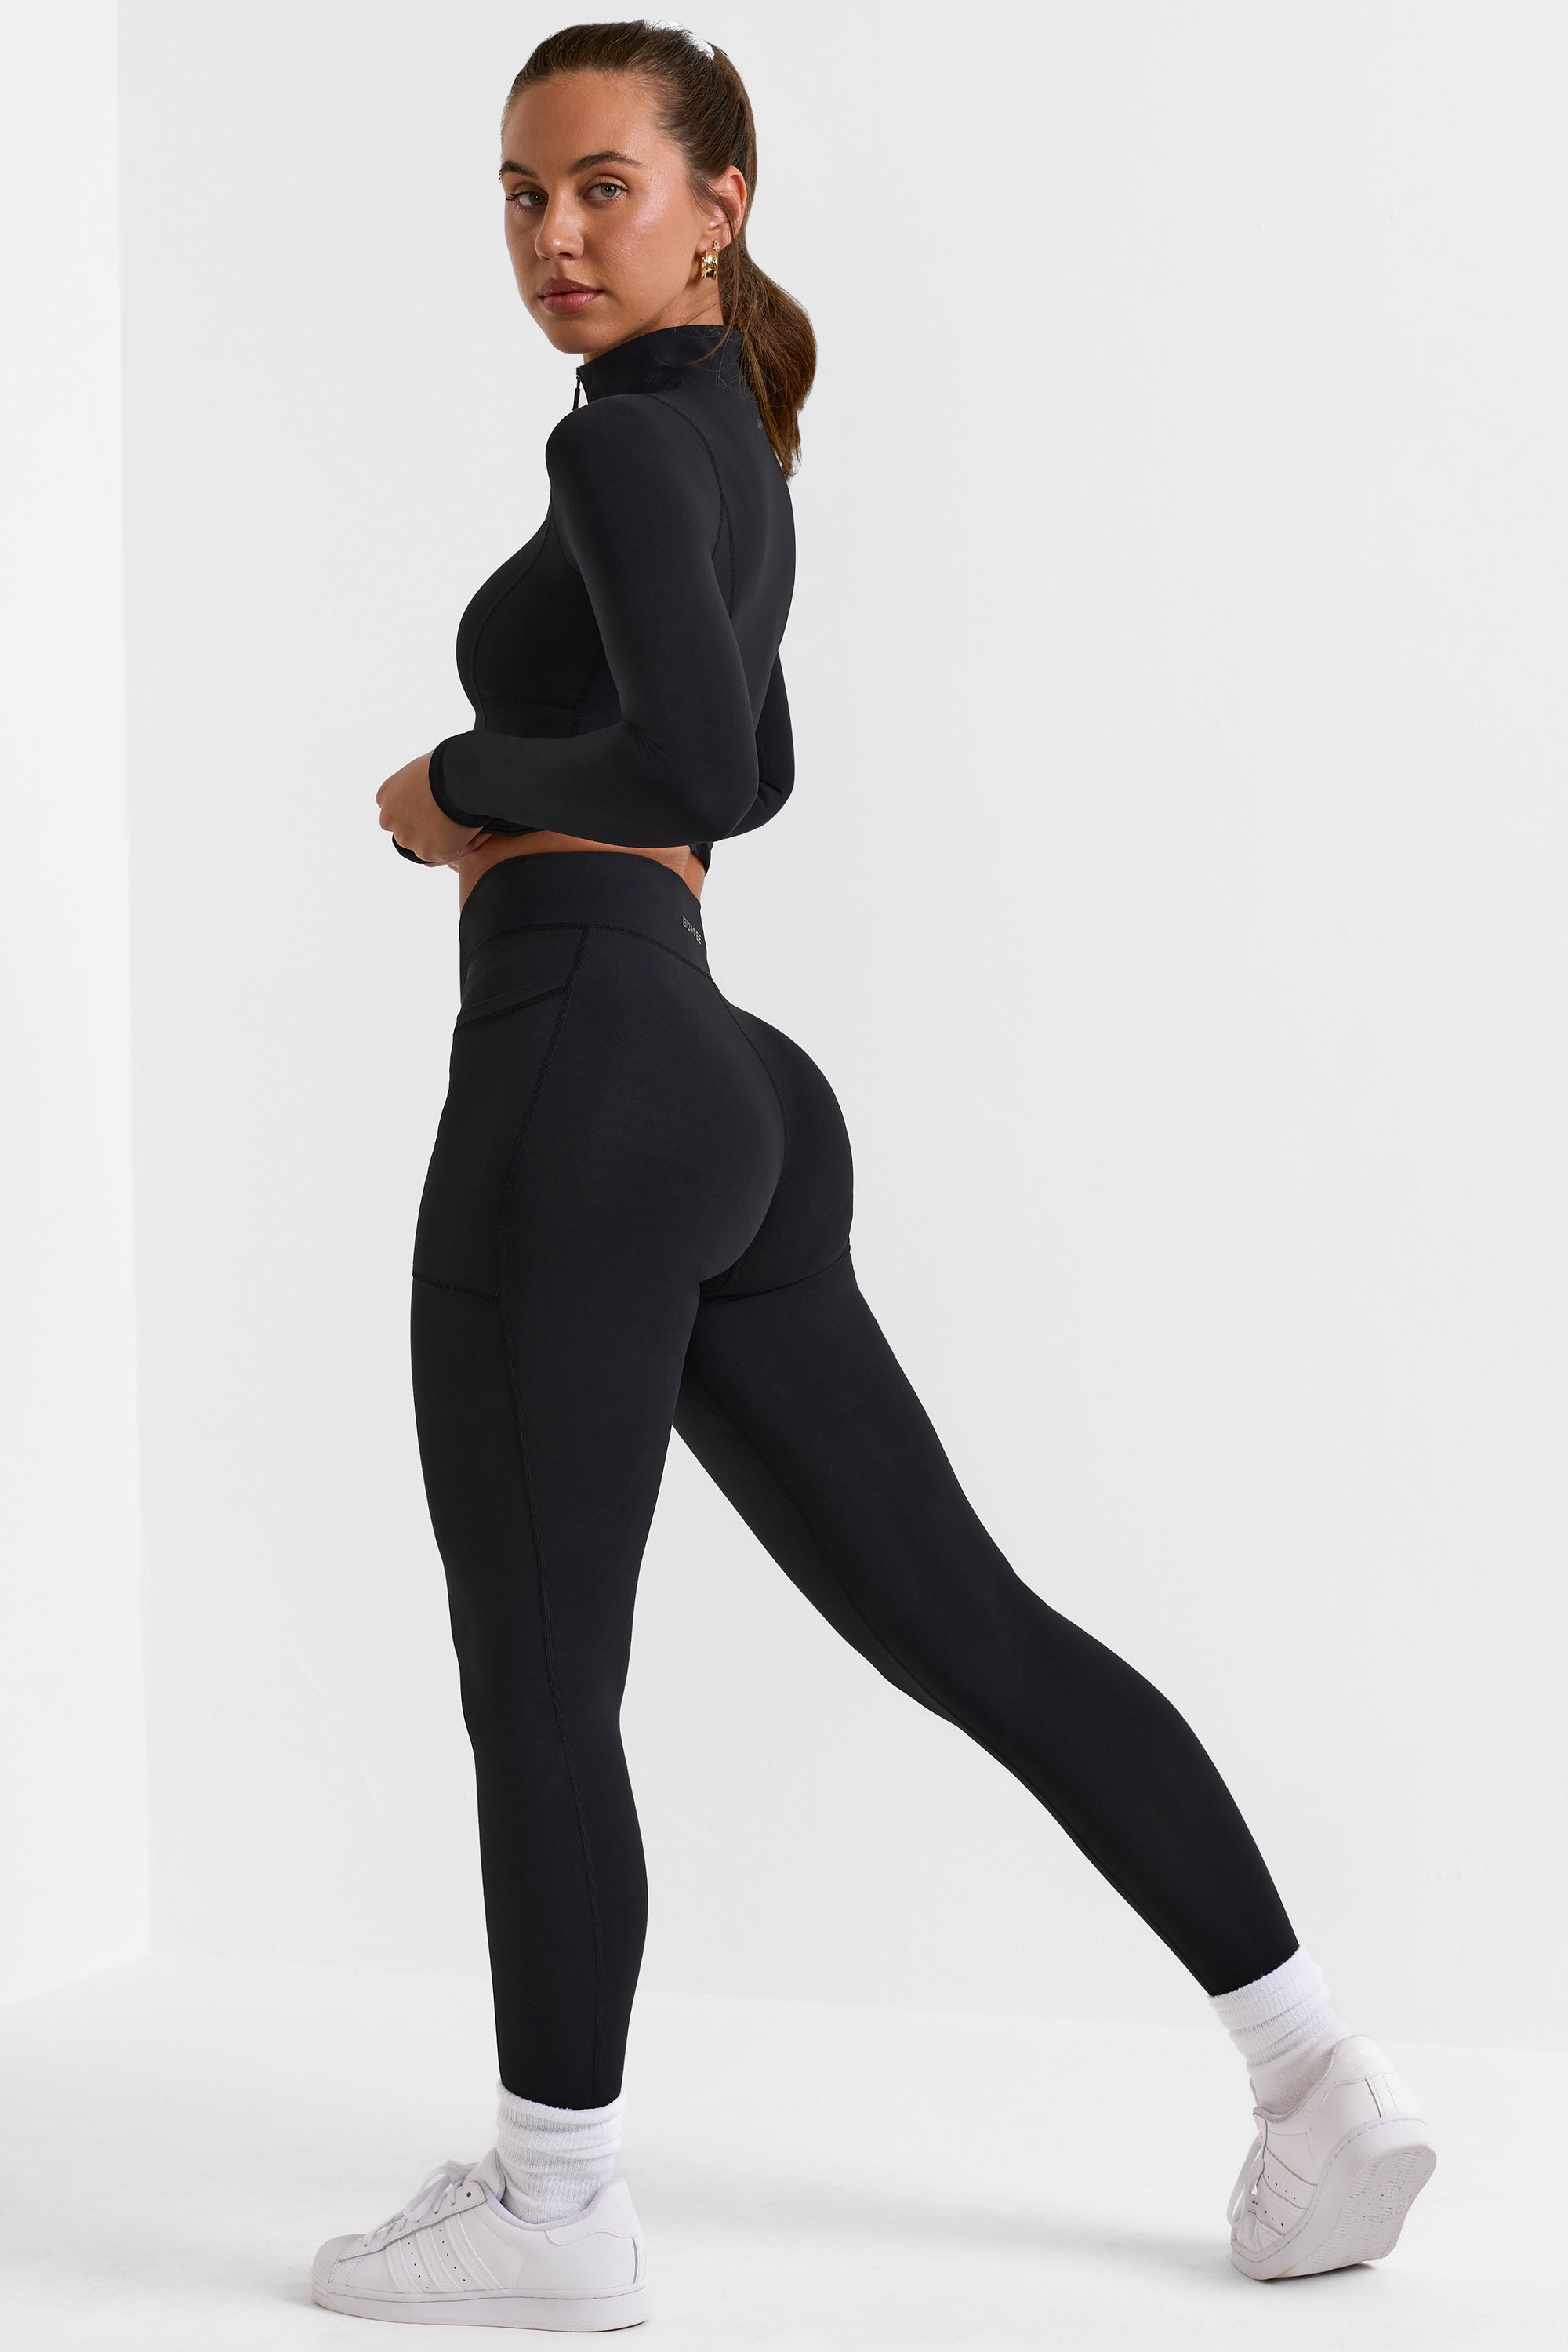 trilece Leggings for Women - Yoga Pants High Waisted with Pockets